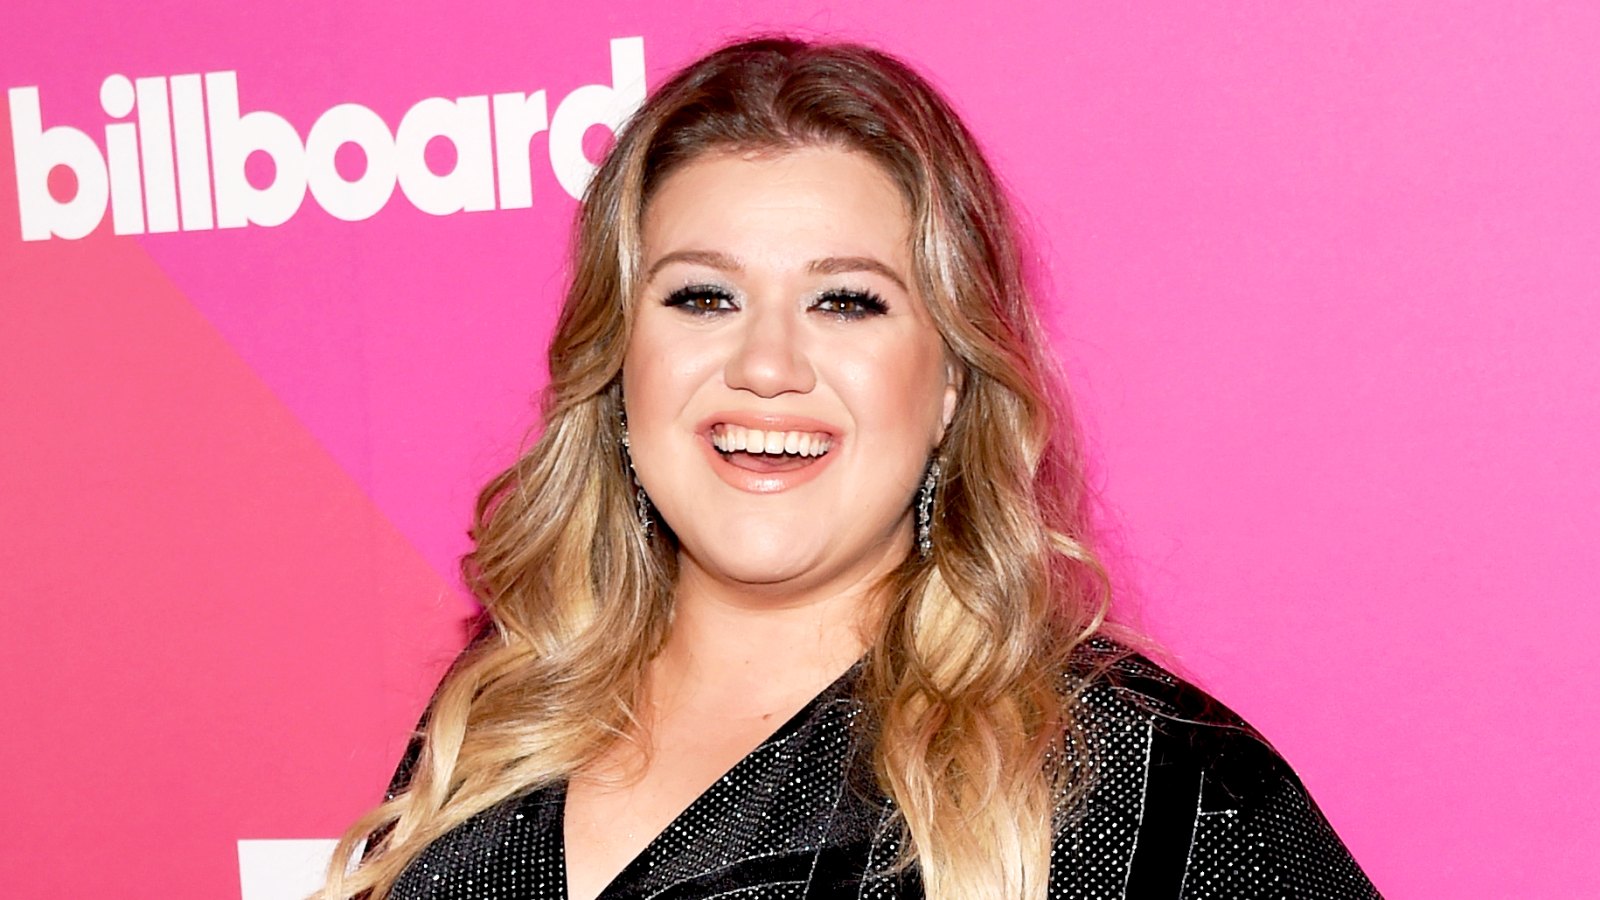 Kelly Clarkson attends Billboard Women in Music 2017 at The Ray Dolby Ballroom at Hollywood & Highland Center in Hollywood, California.